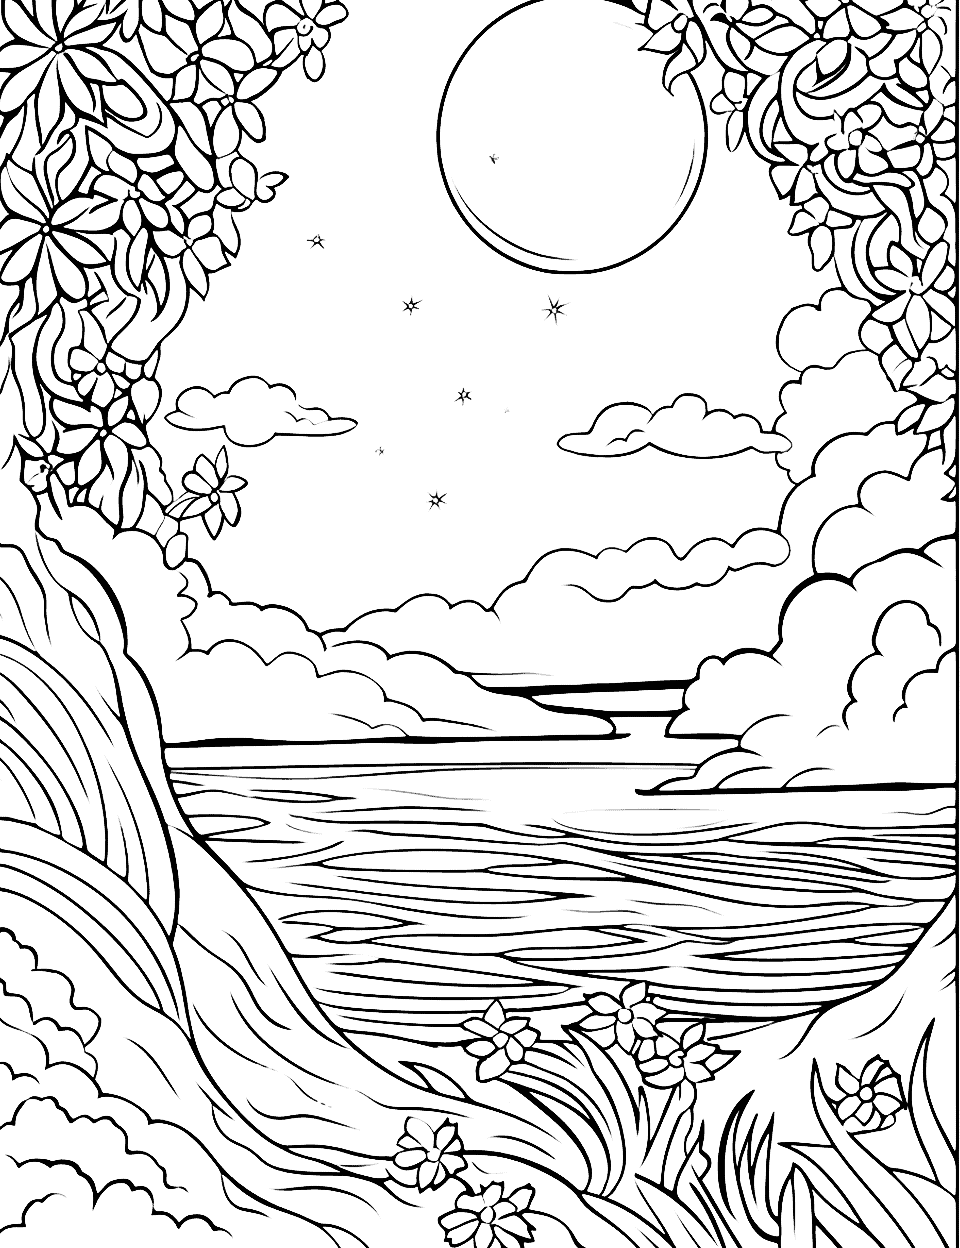 Moonlit Summer Night Adult Coloring Page - A detailed scene of a summer night under a moonlit sky featuring a peaceful beach, glowing fireflies, and a star-filled sky.